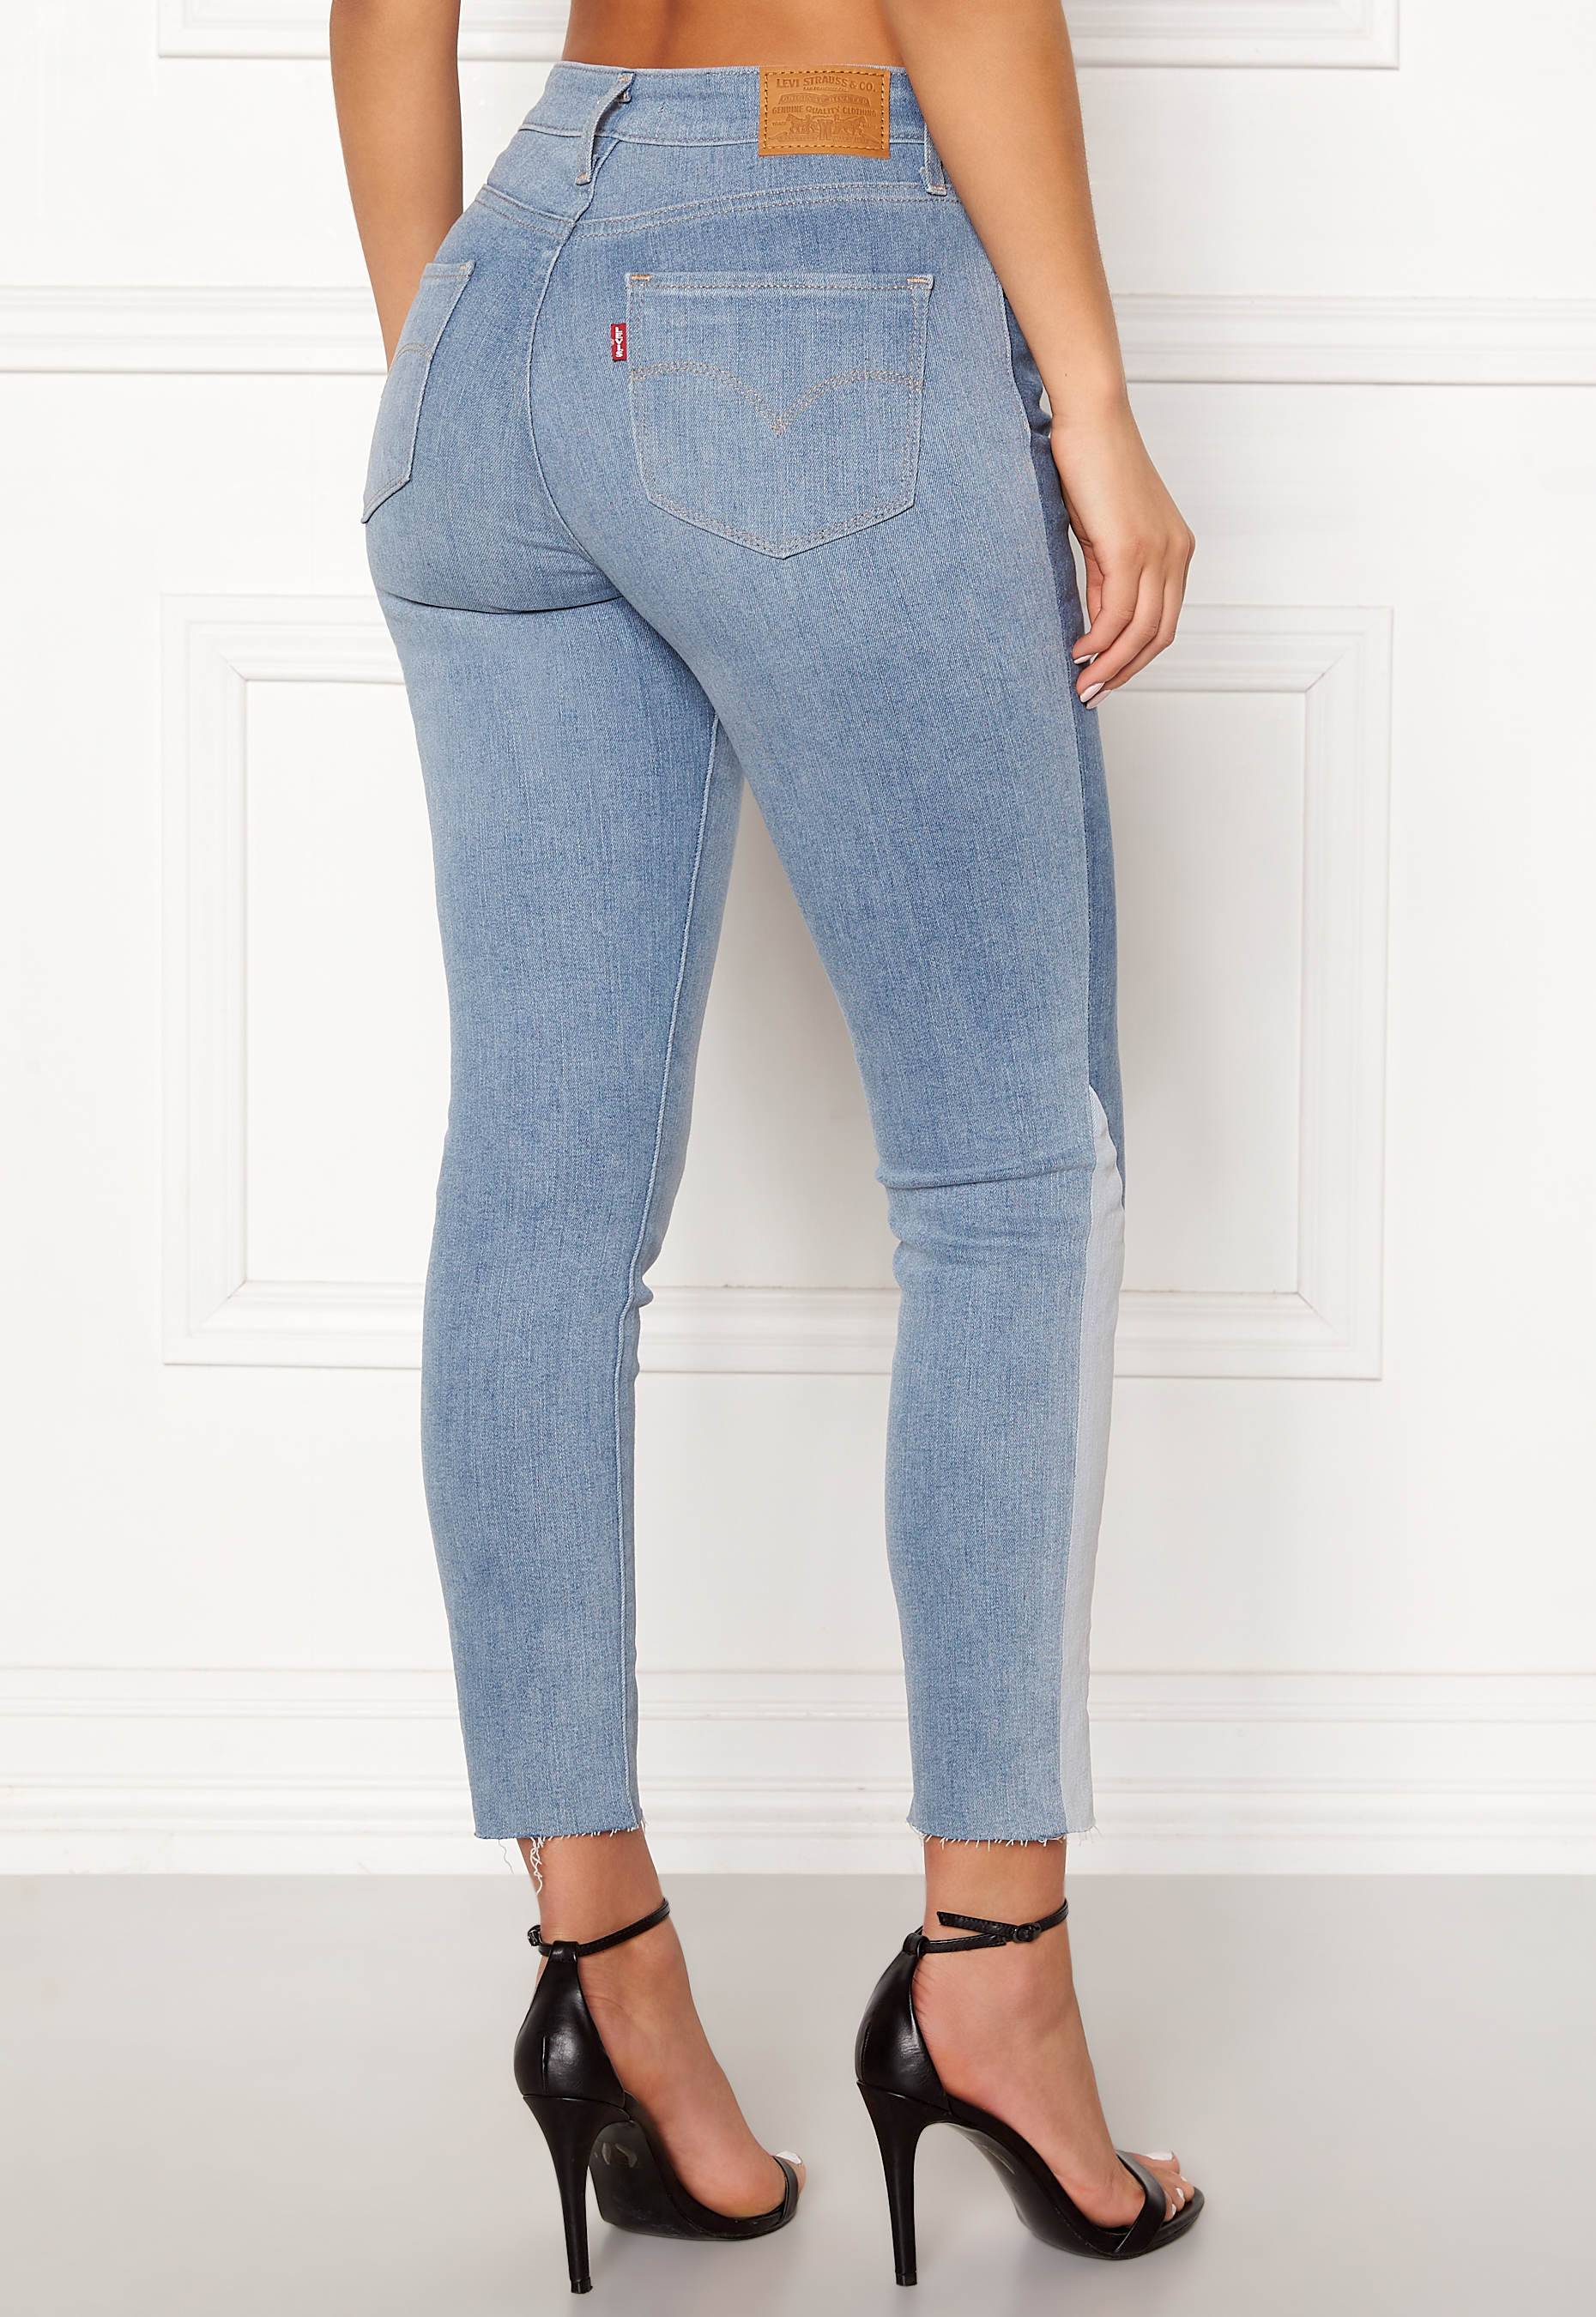 721 high rise skinny ankle